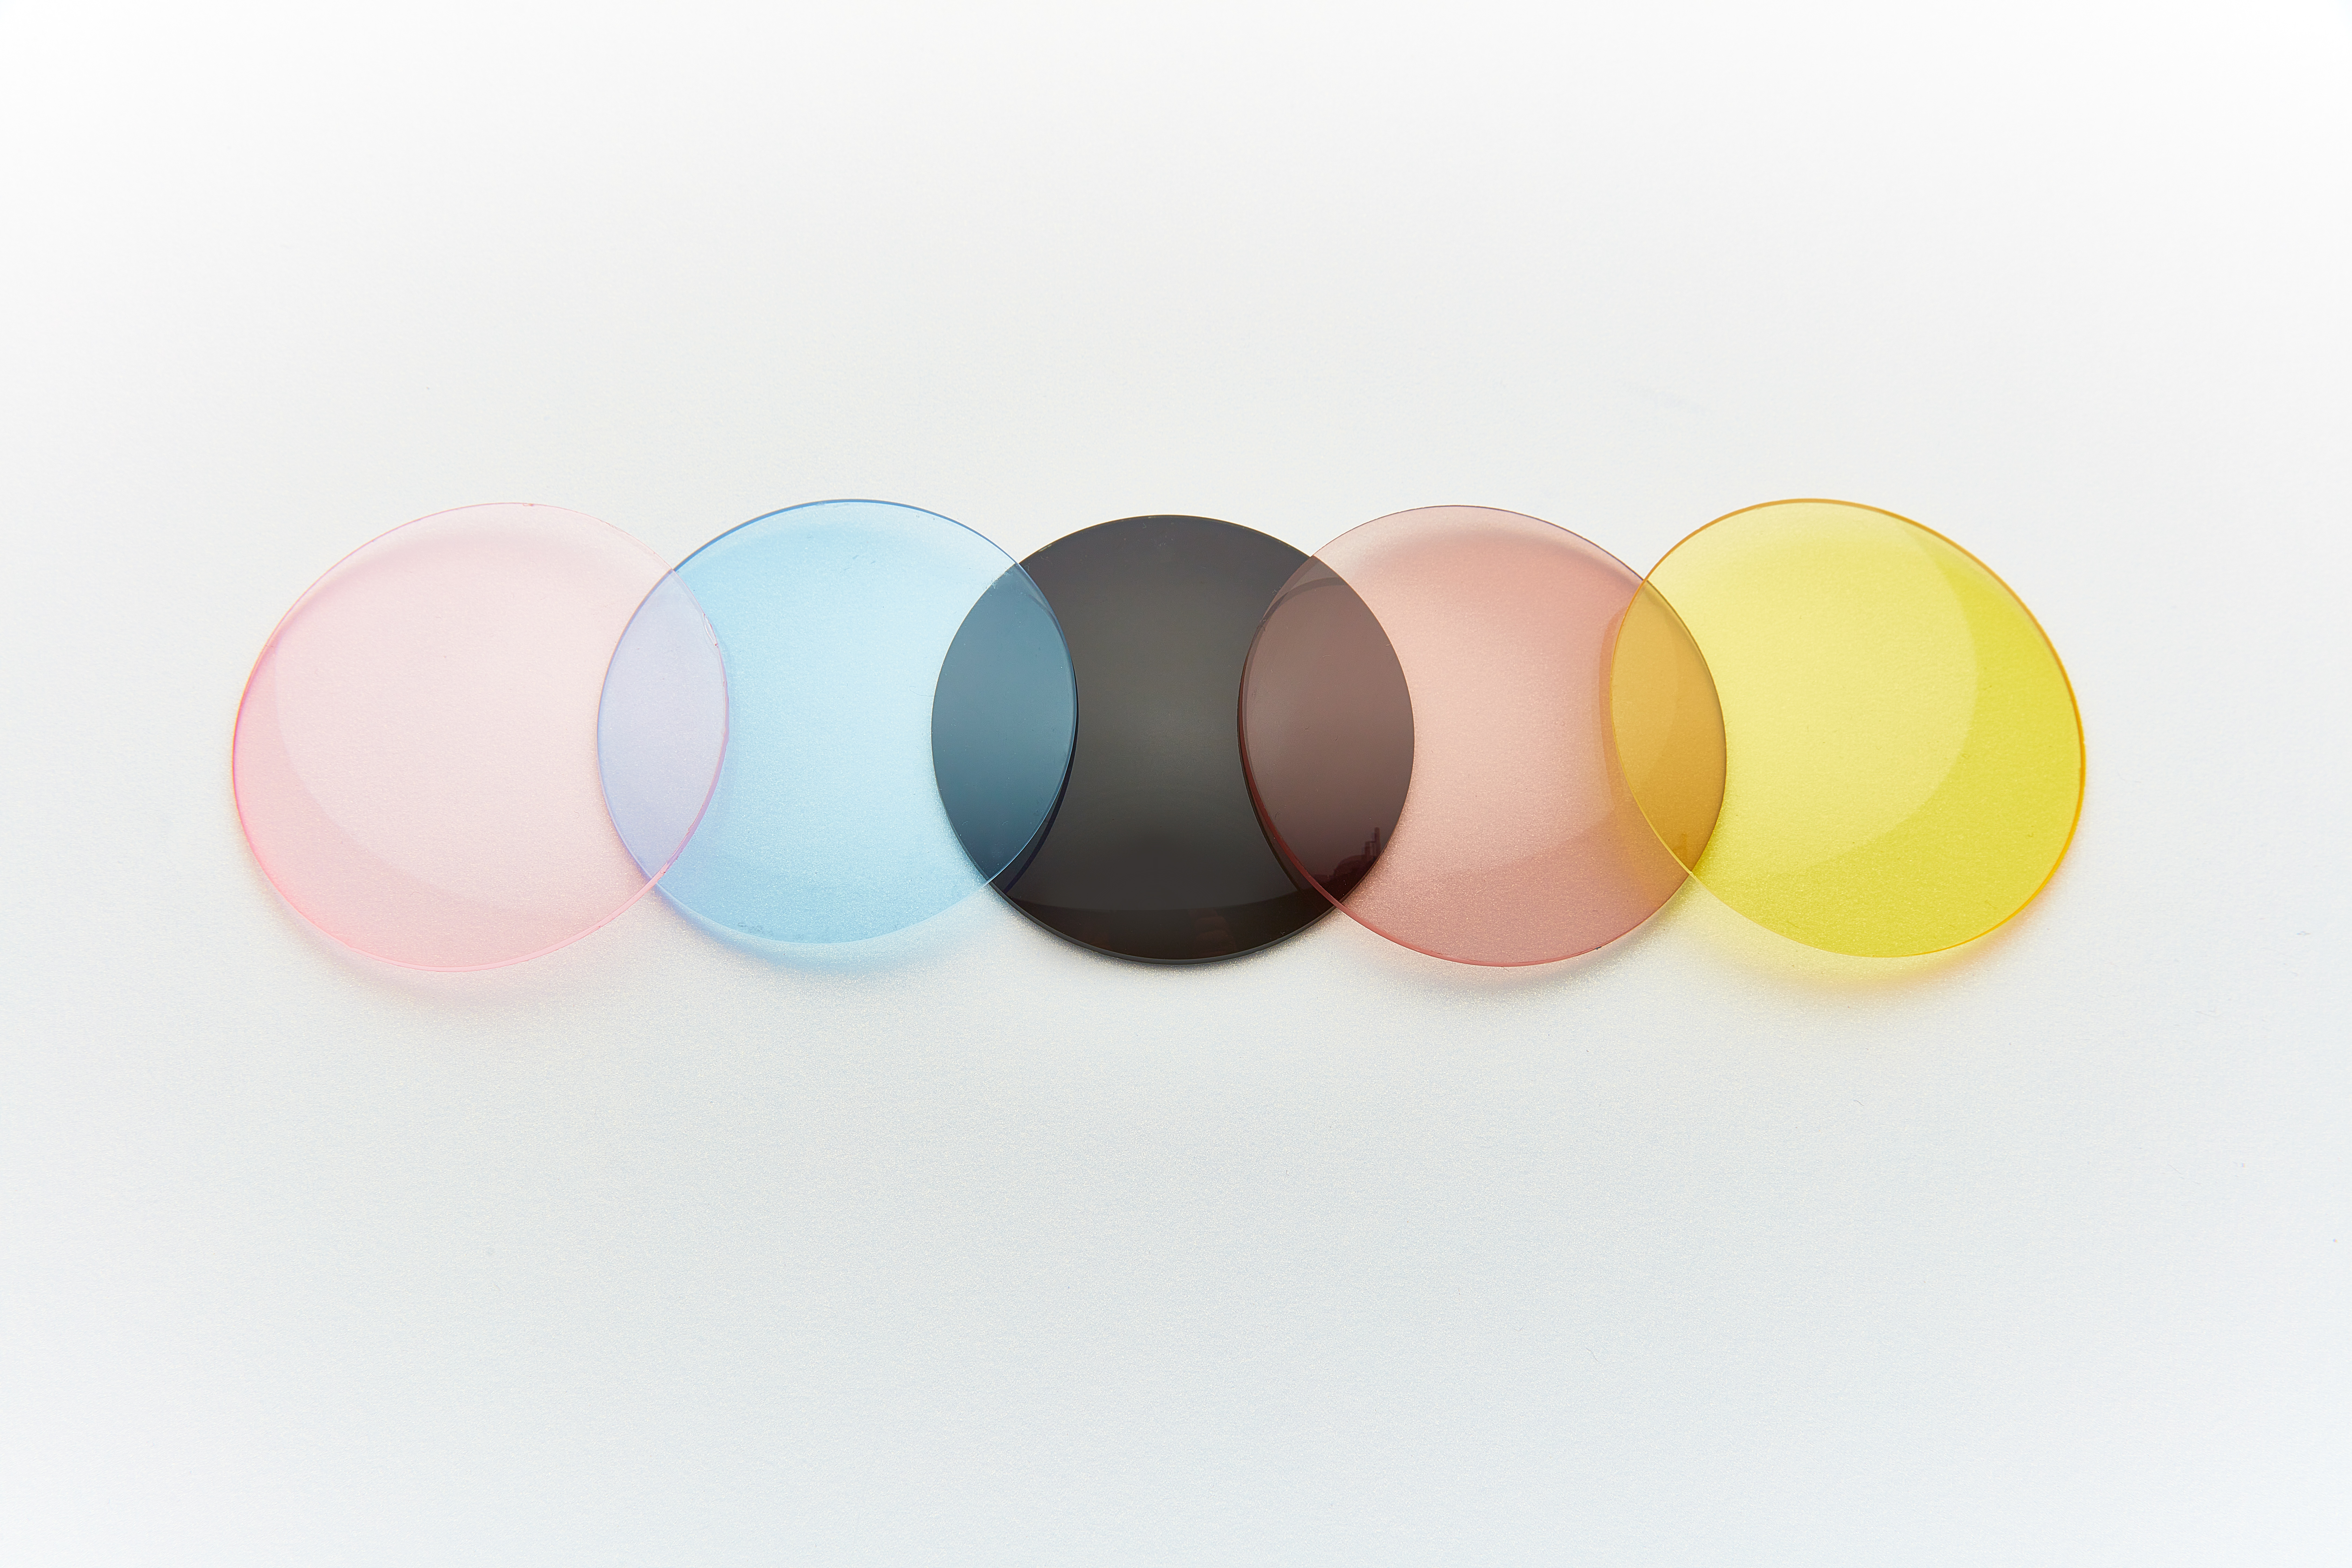 5 lenses (pink, blue, black, pink, yellow) superimposed to see color mixtures